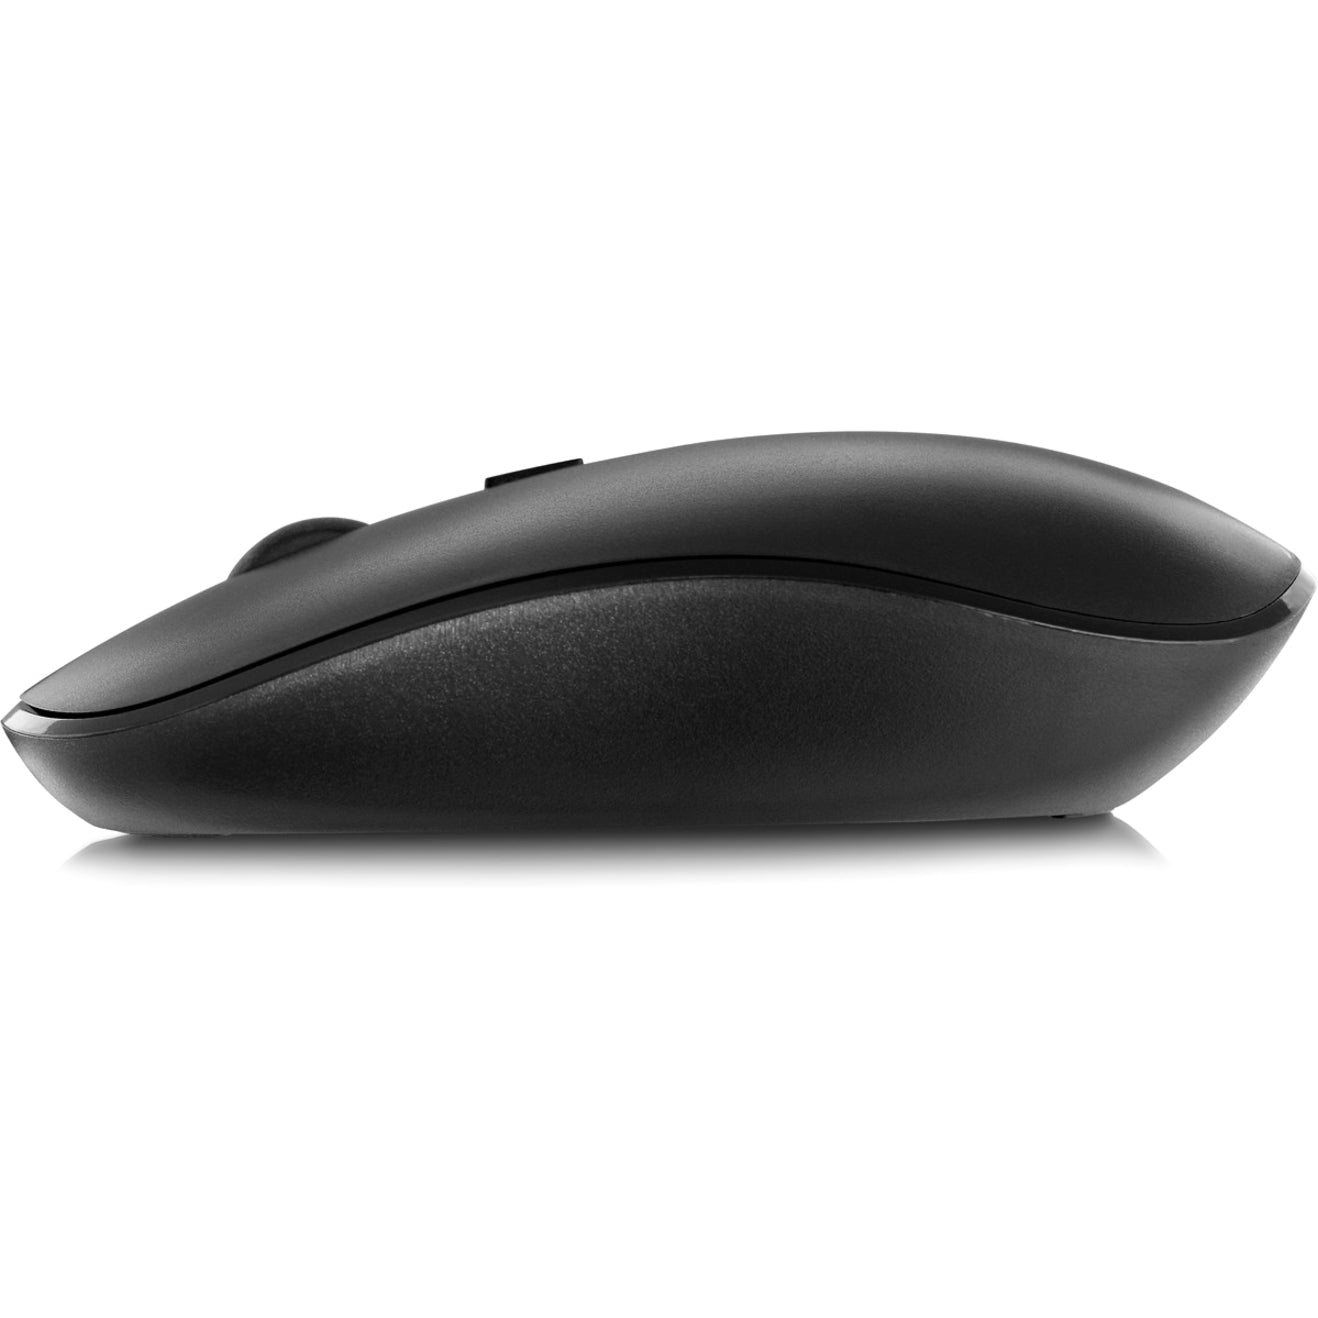 V7 CKW200US Wireless Keyboard and Mouse Combo, Spill Resistant, Adjustable Feet, 30 ft Wireless Range